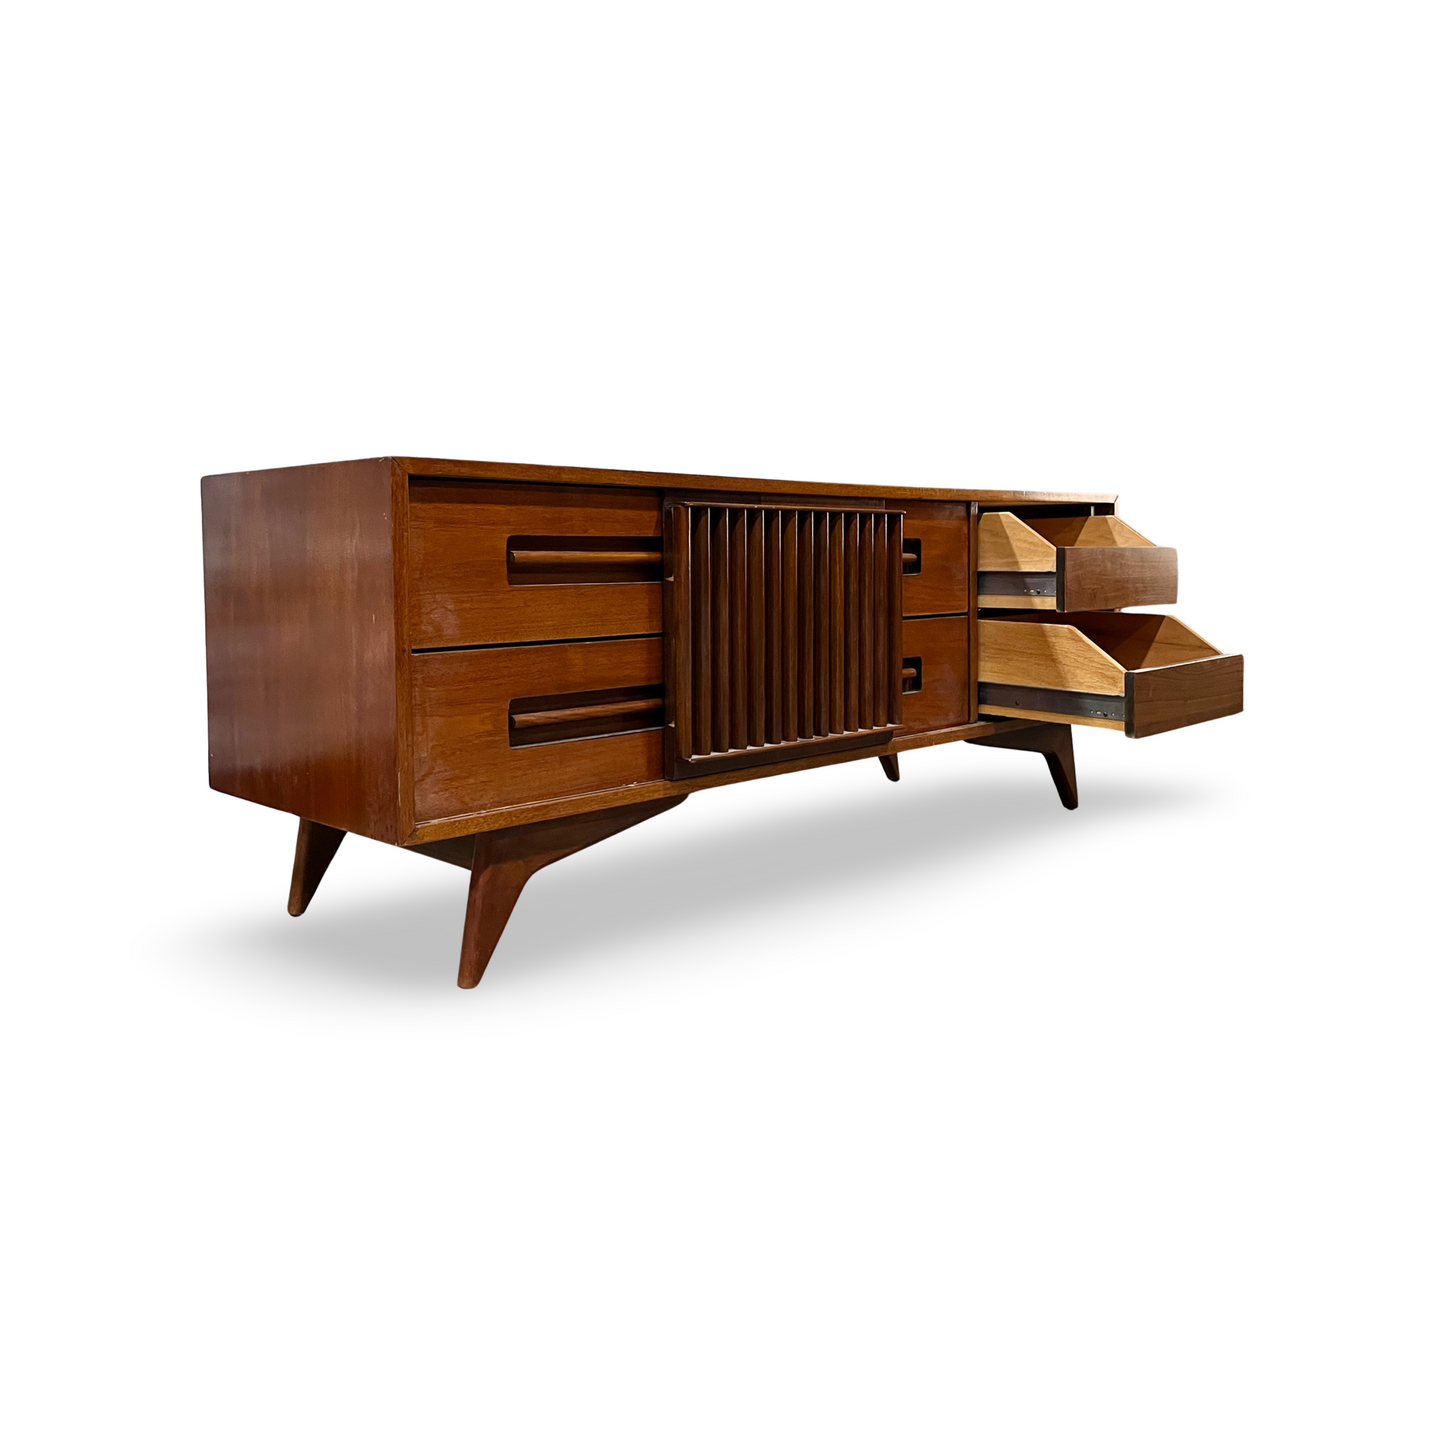 Young Manufacturing Vintage Mid Century Modern Low Profile Credenza Dresser c. 1960s